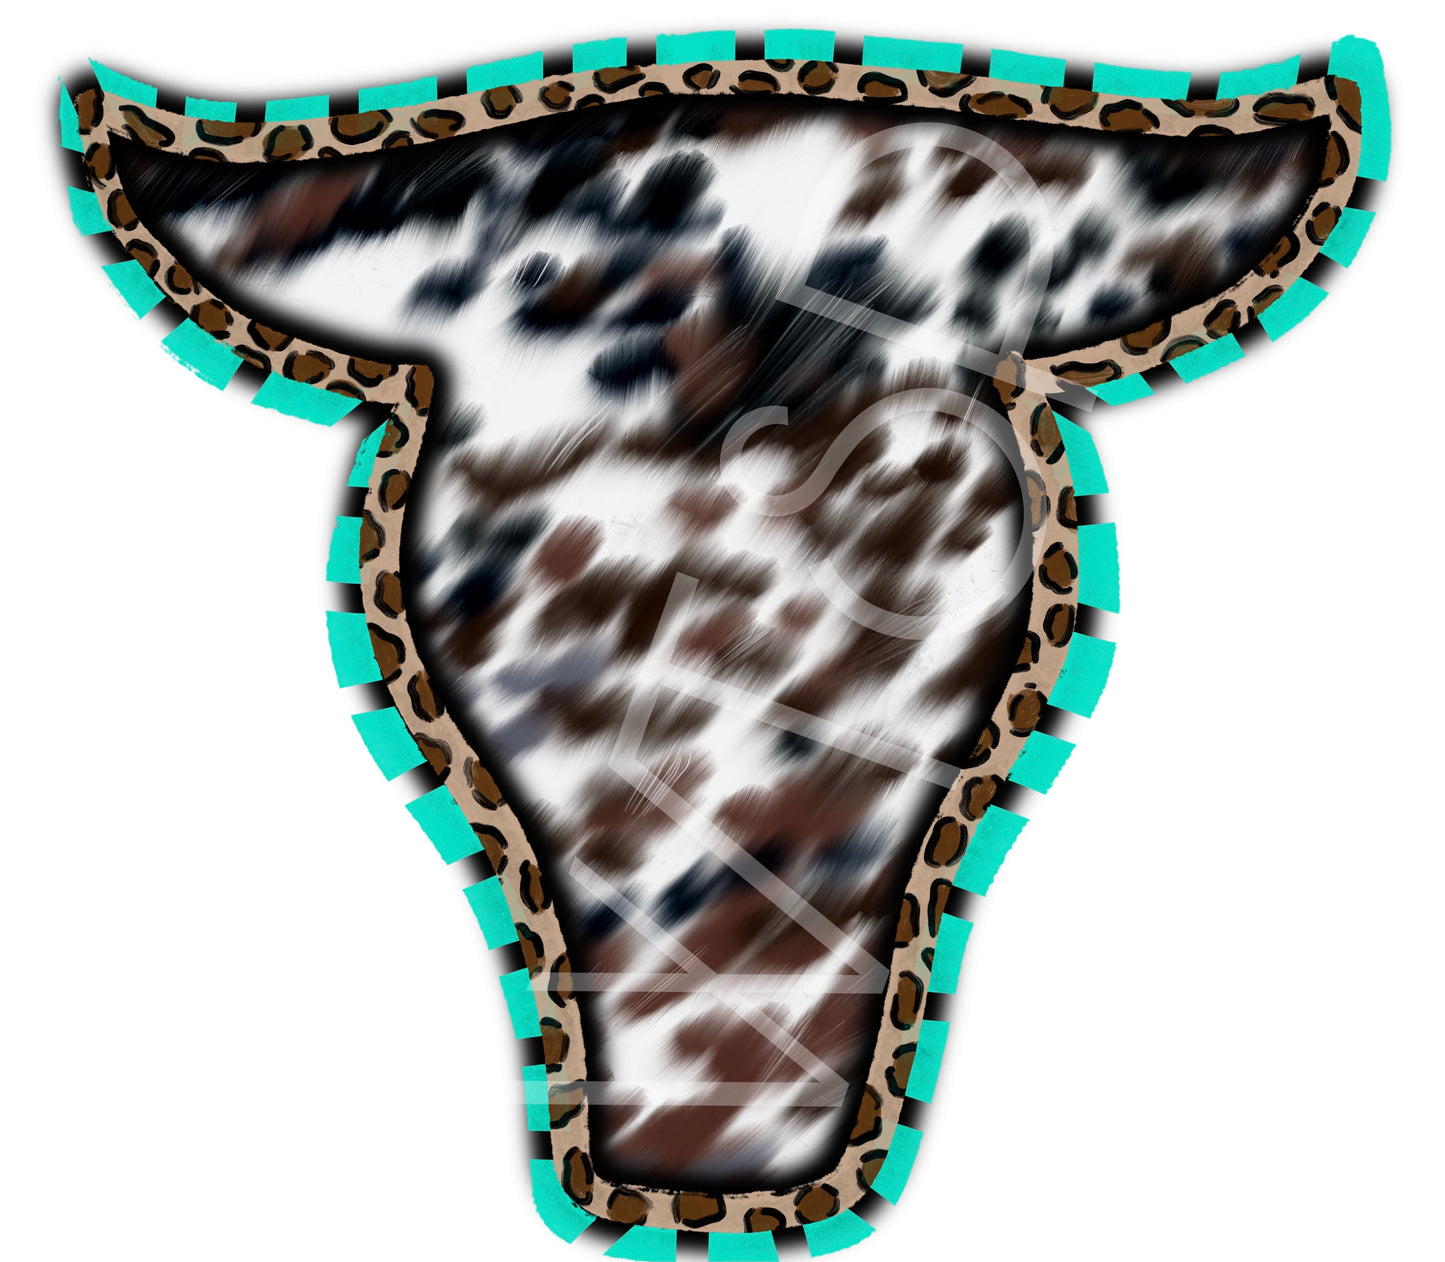 Bull skull with cheetah and cowhide